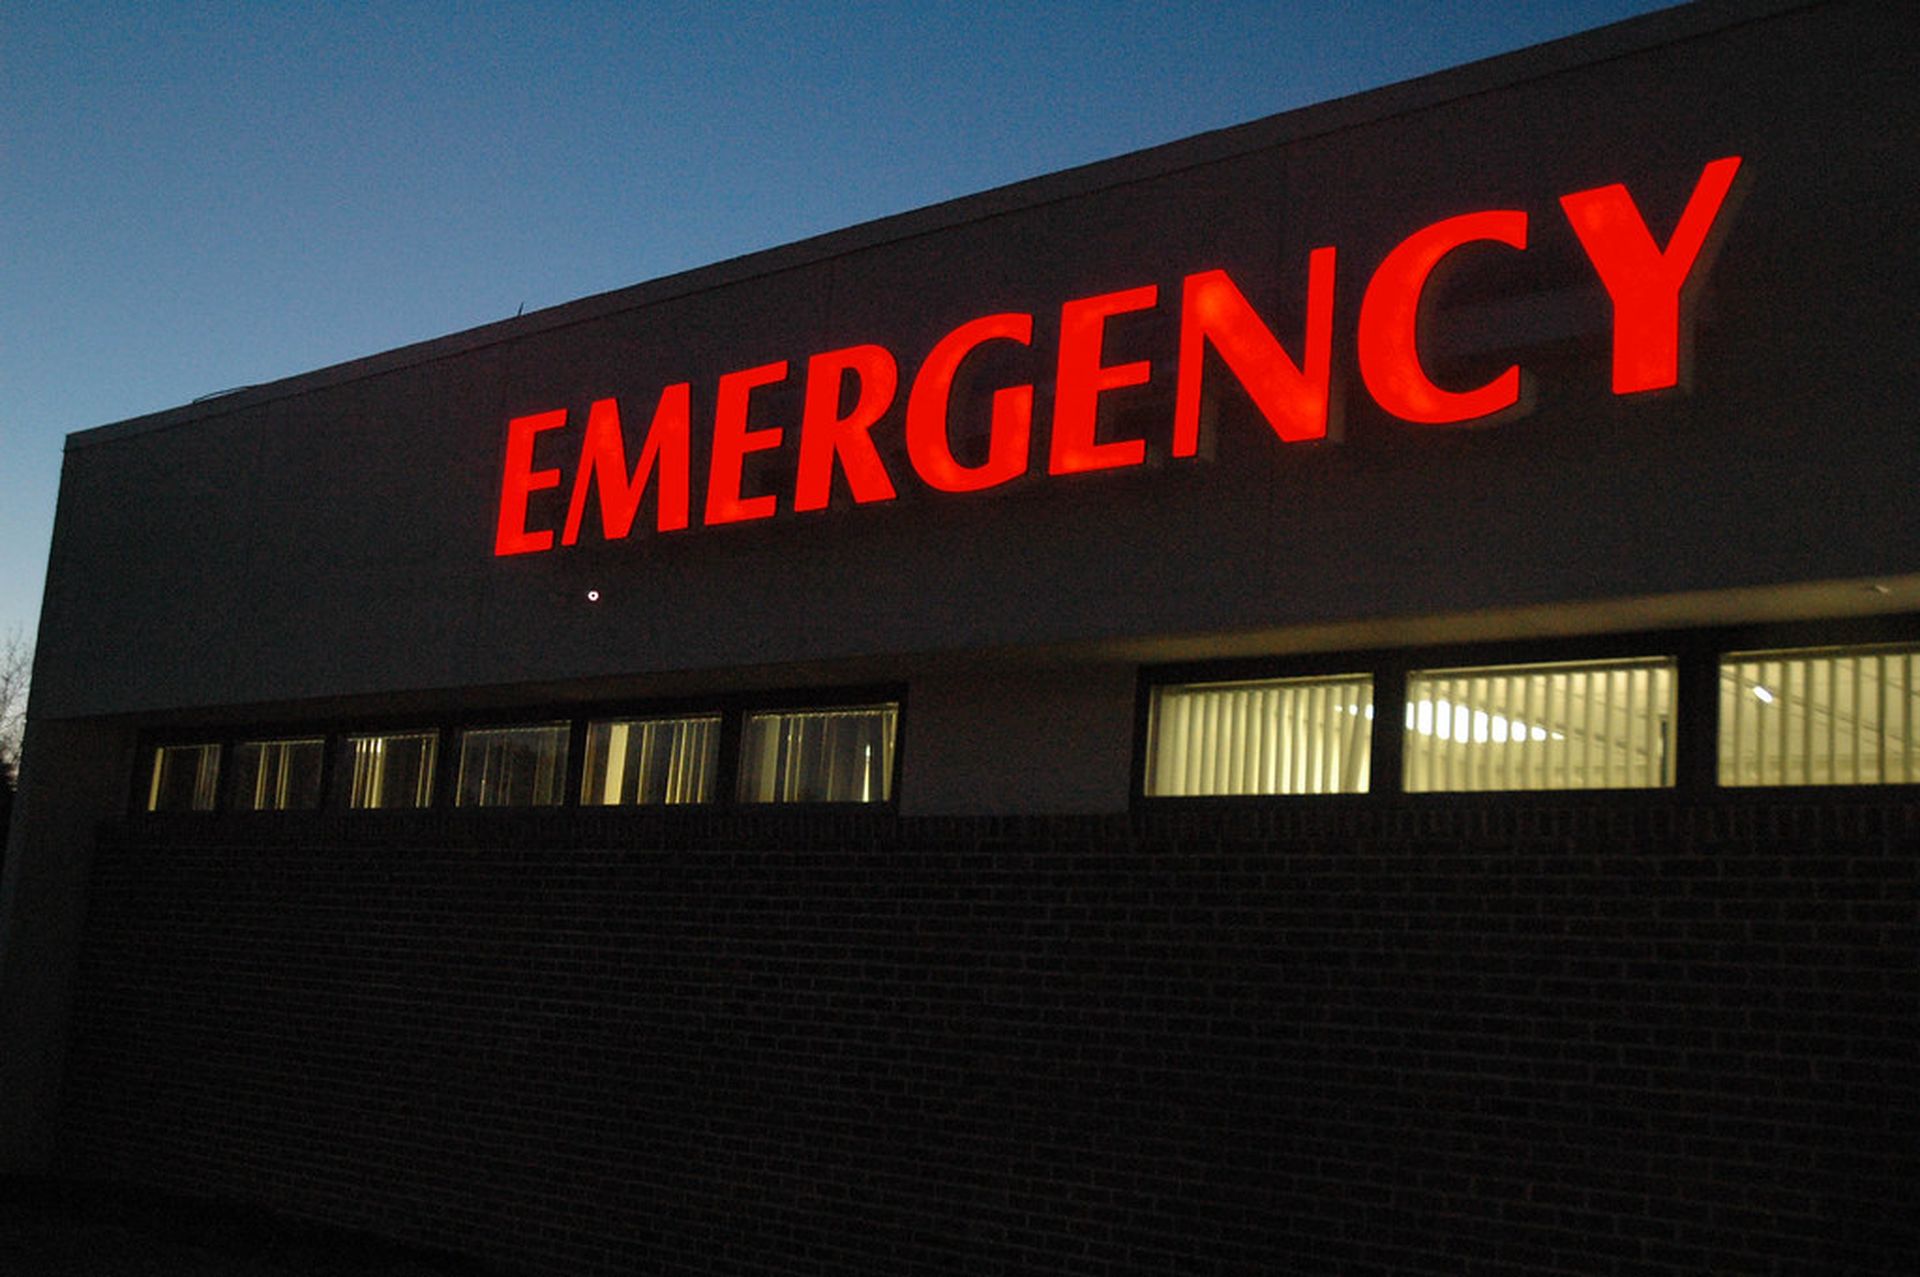 OakBend Medical Center in Texas is currently facing communication issues as it works to rebuild its hospital network after a ransomware attack. (Photo credit: &#8220;Emergency room&#8221; by KOMUnews is licensed under CC BY 2.0.)